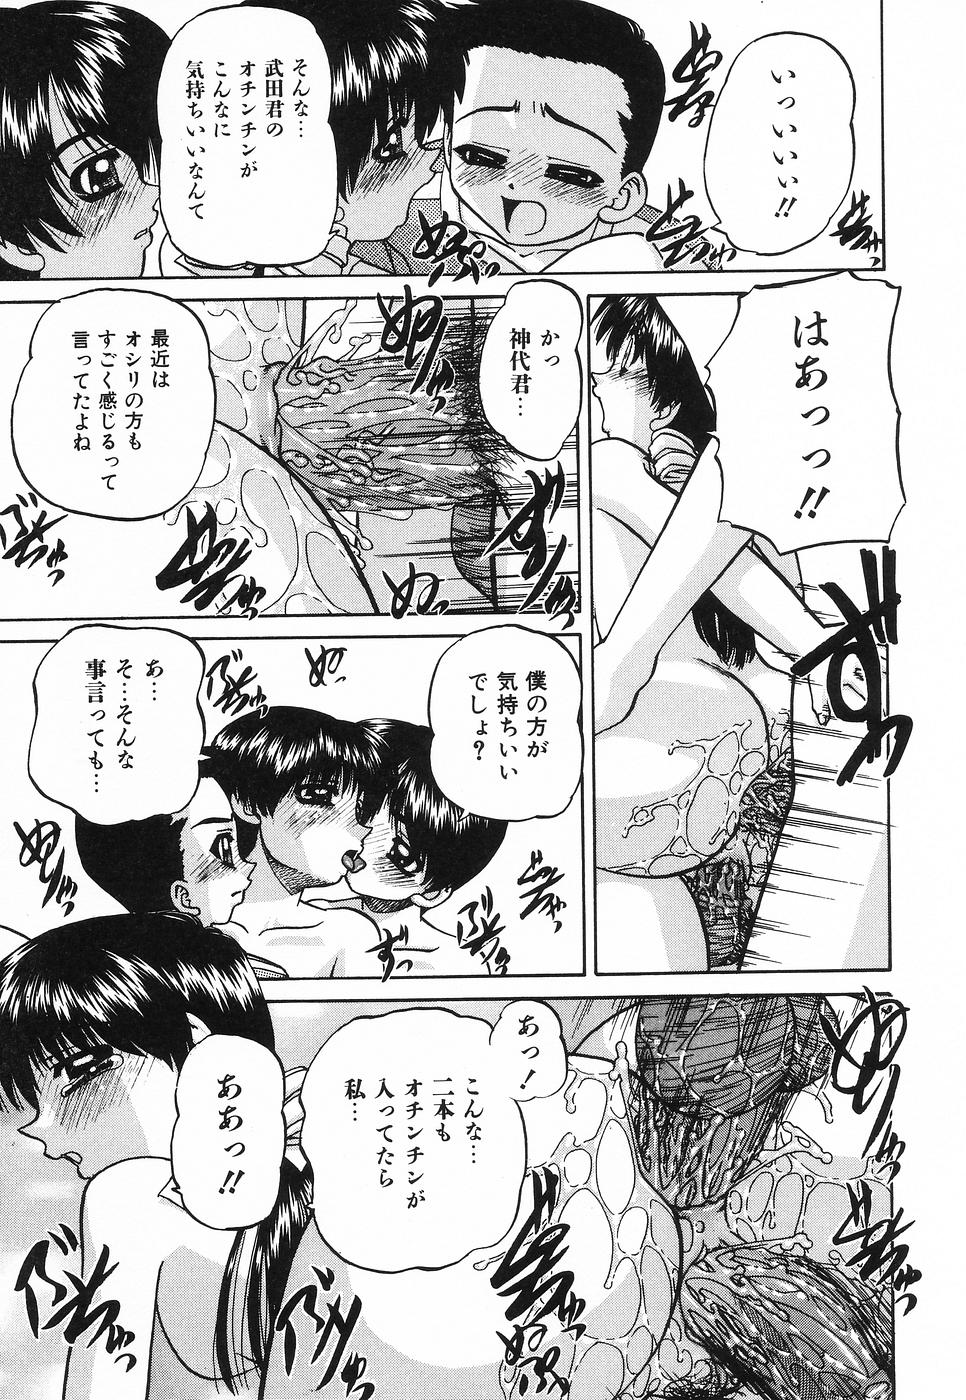 [Chunrouzan] Hime Hajime - First sexual intercourse in a New Year page 44 full